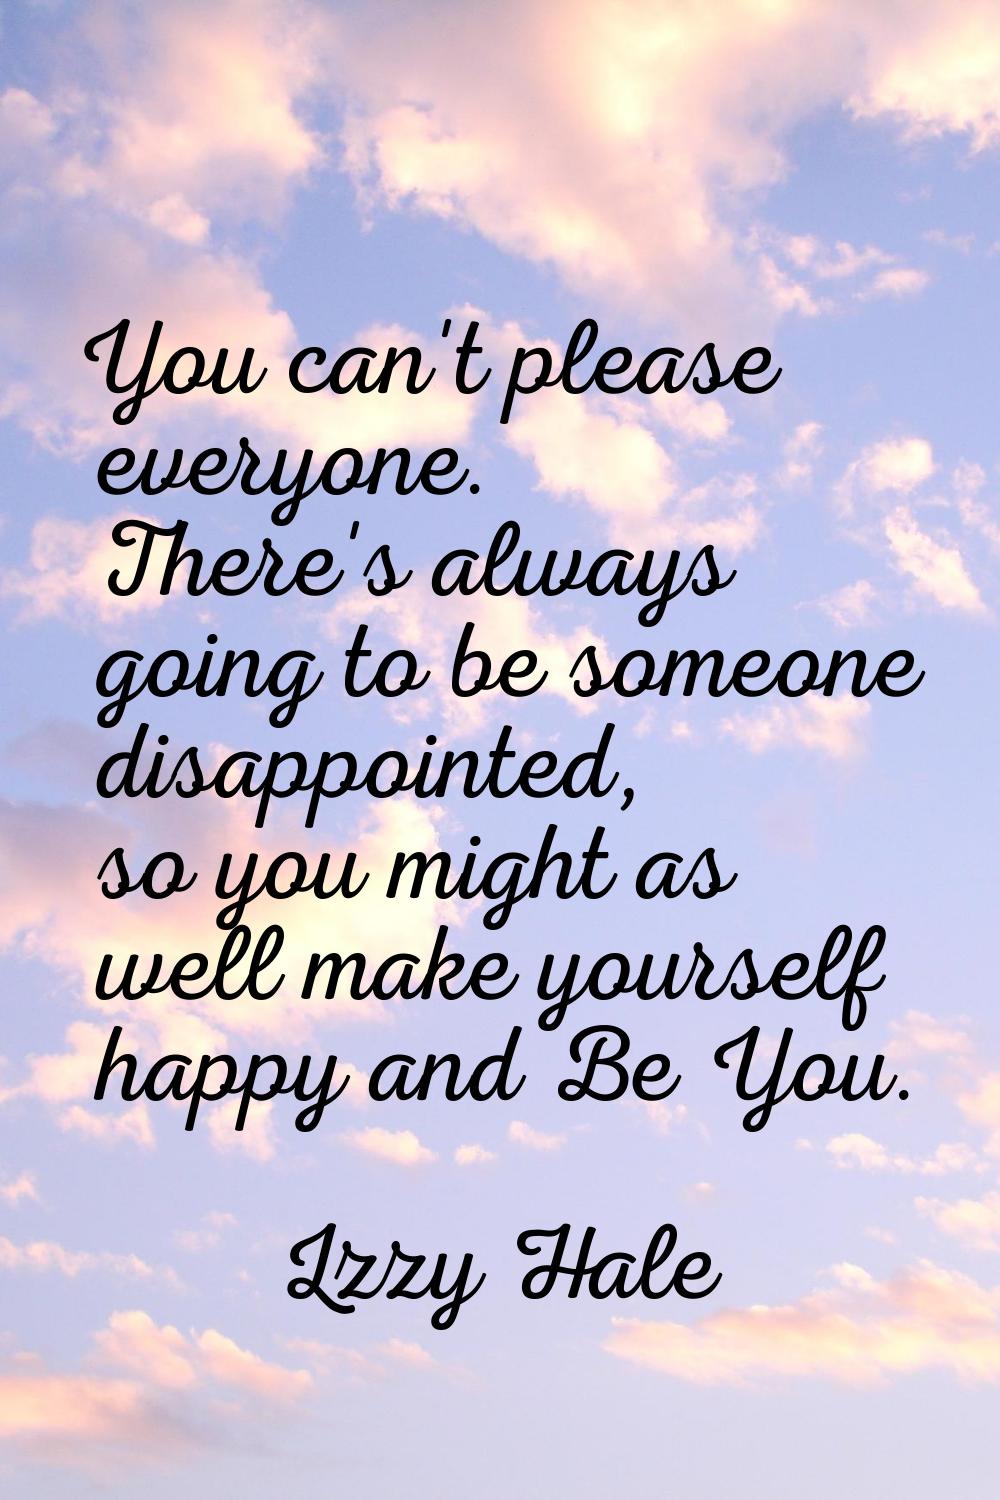 You can't please everyone. There's always going to be someone disappointed, so you might as well ma